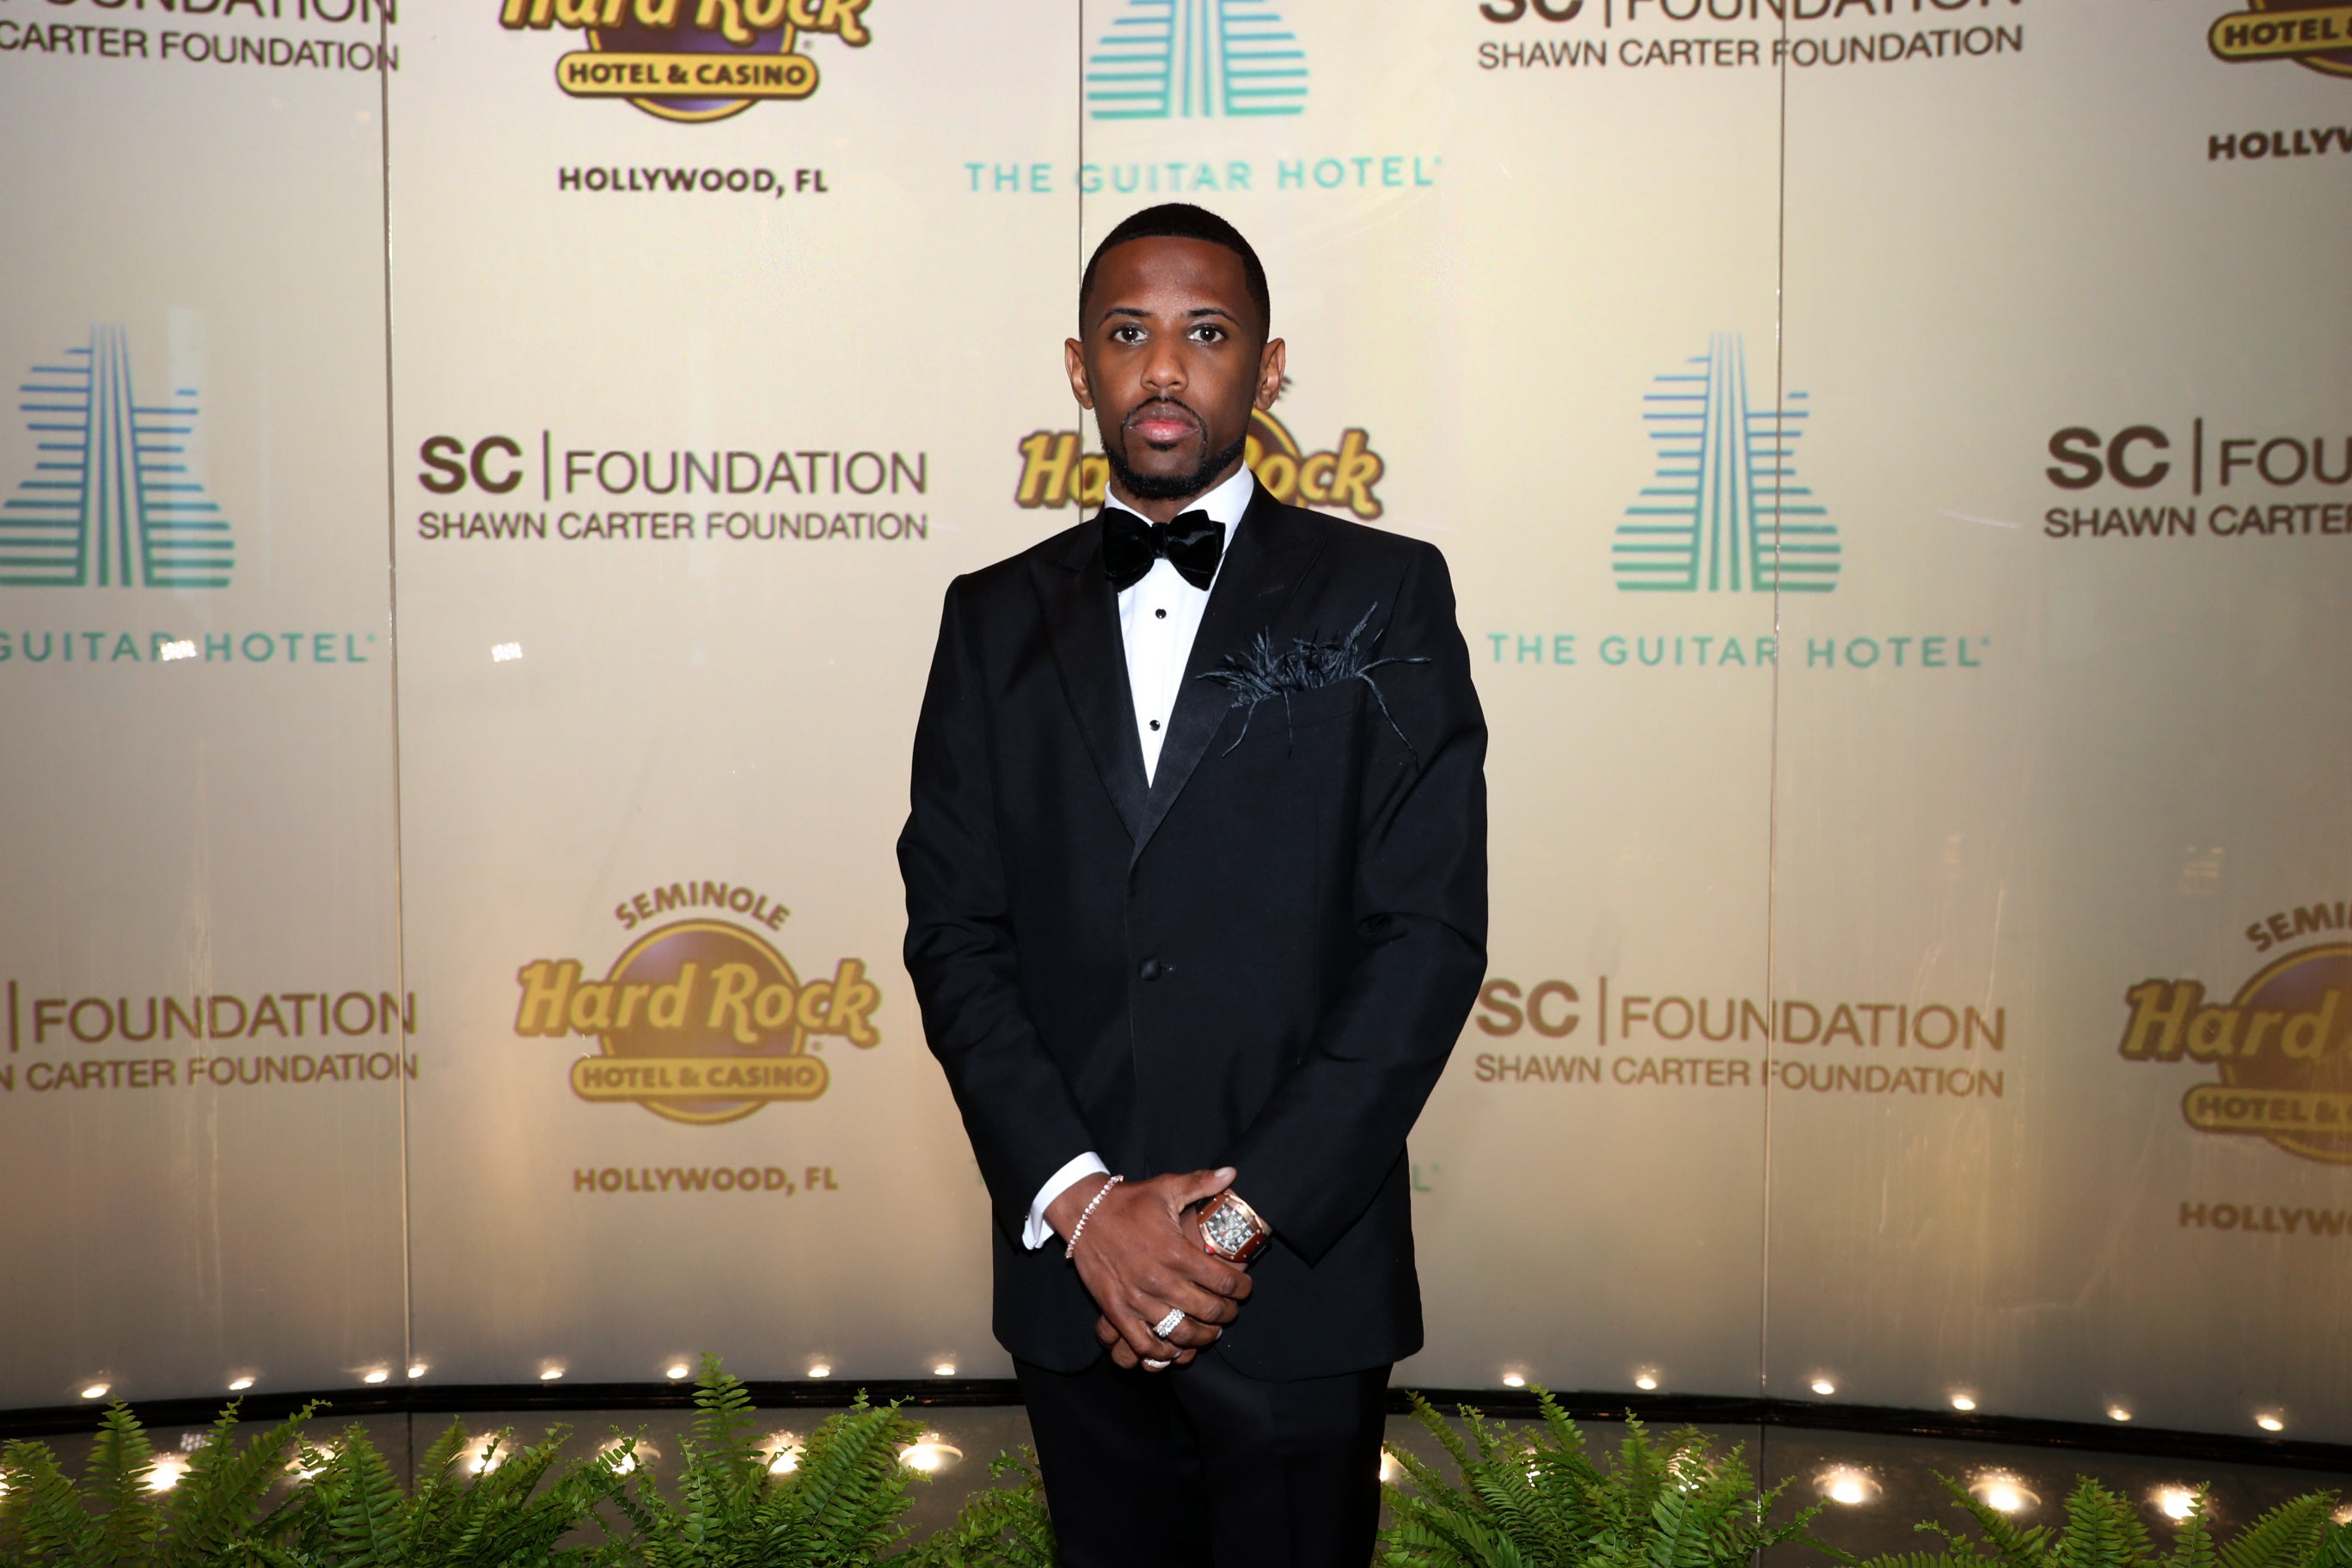 Jay-Z Hosts Inaugural Shawn Carter Foundation Gala...And It Was Star-Studded!